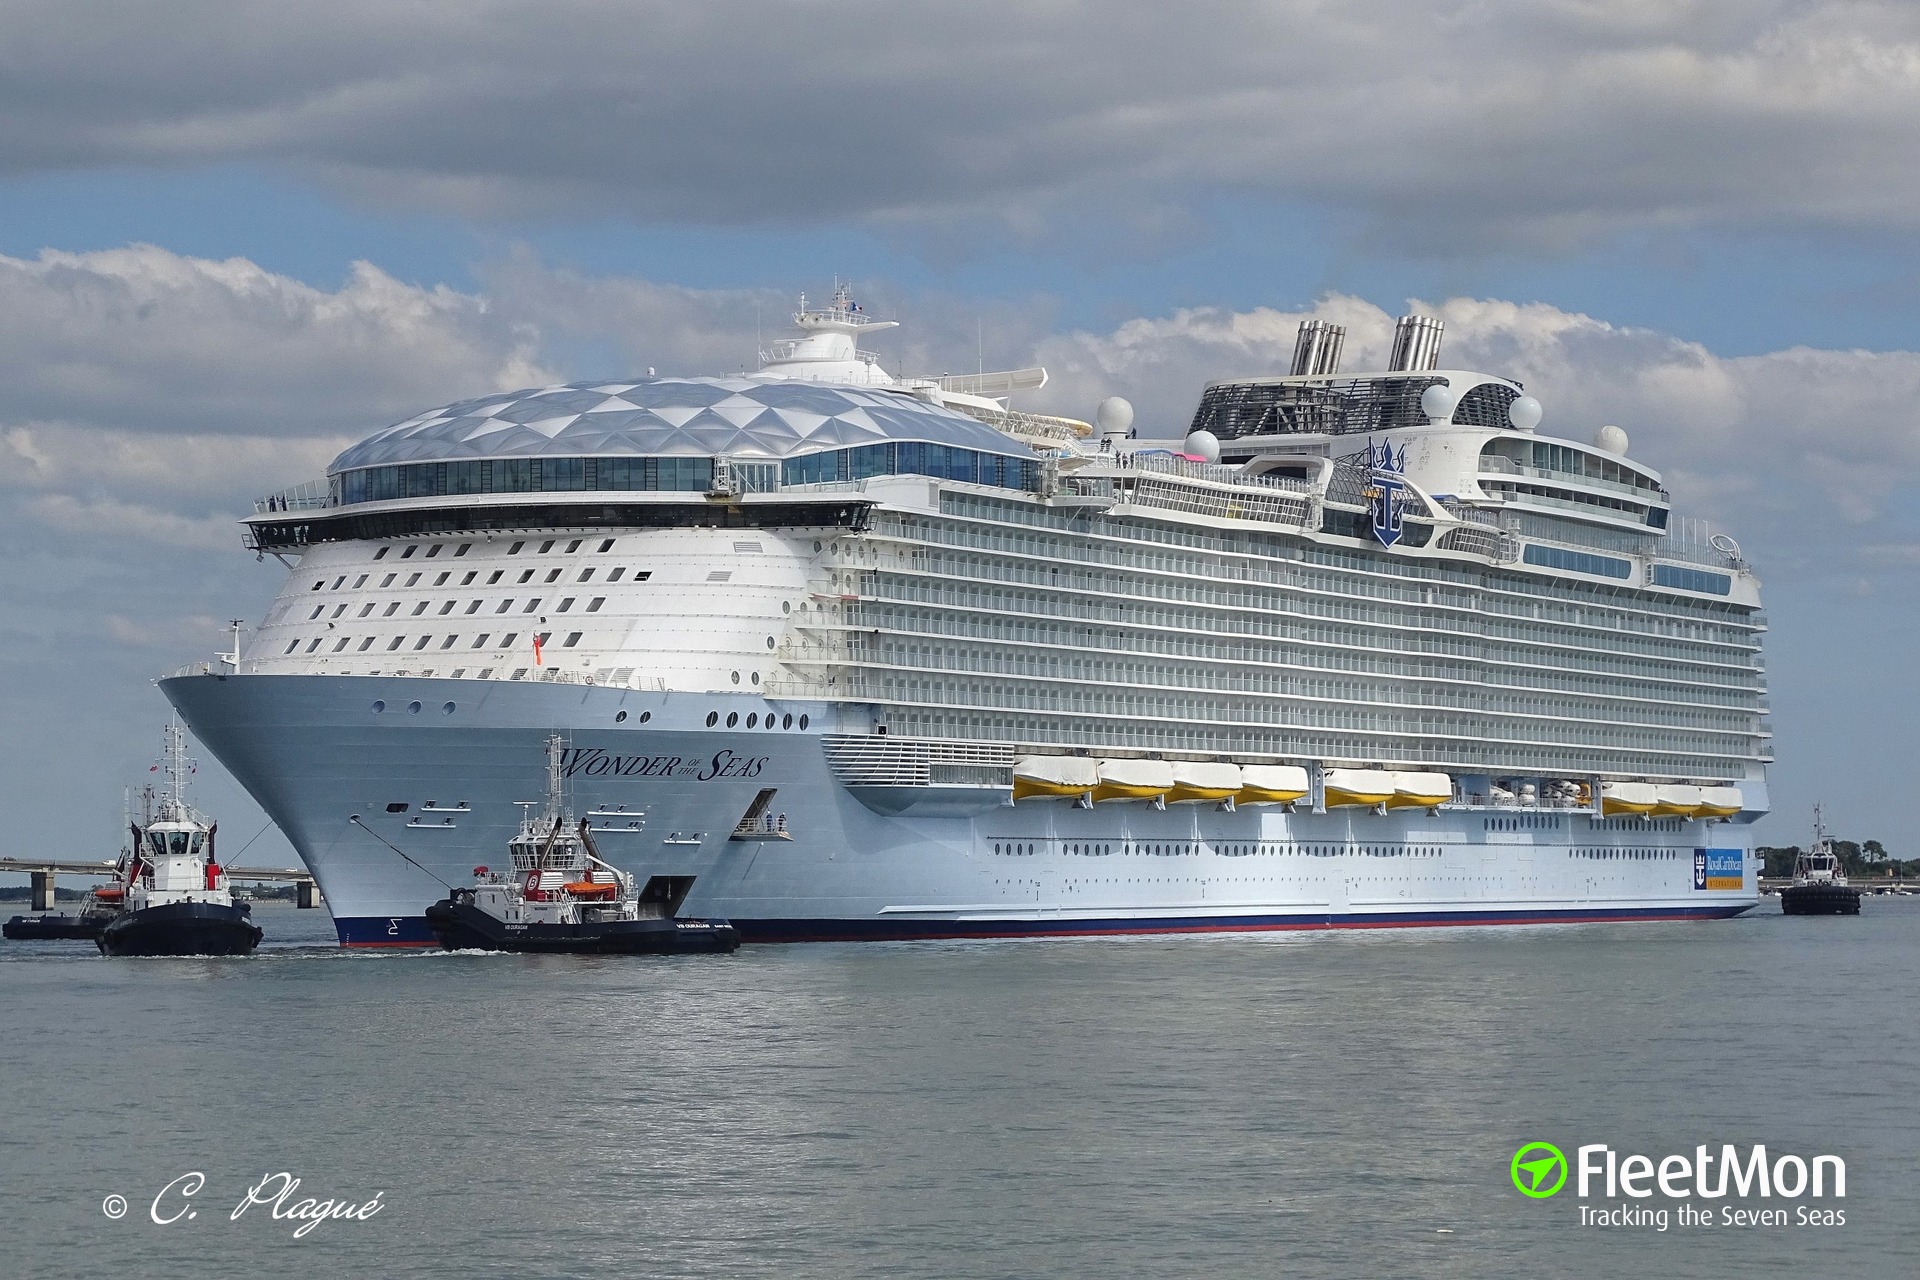 The Allure of the Seas is the biggest cruise ship in the world. 